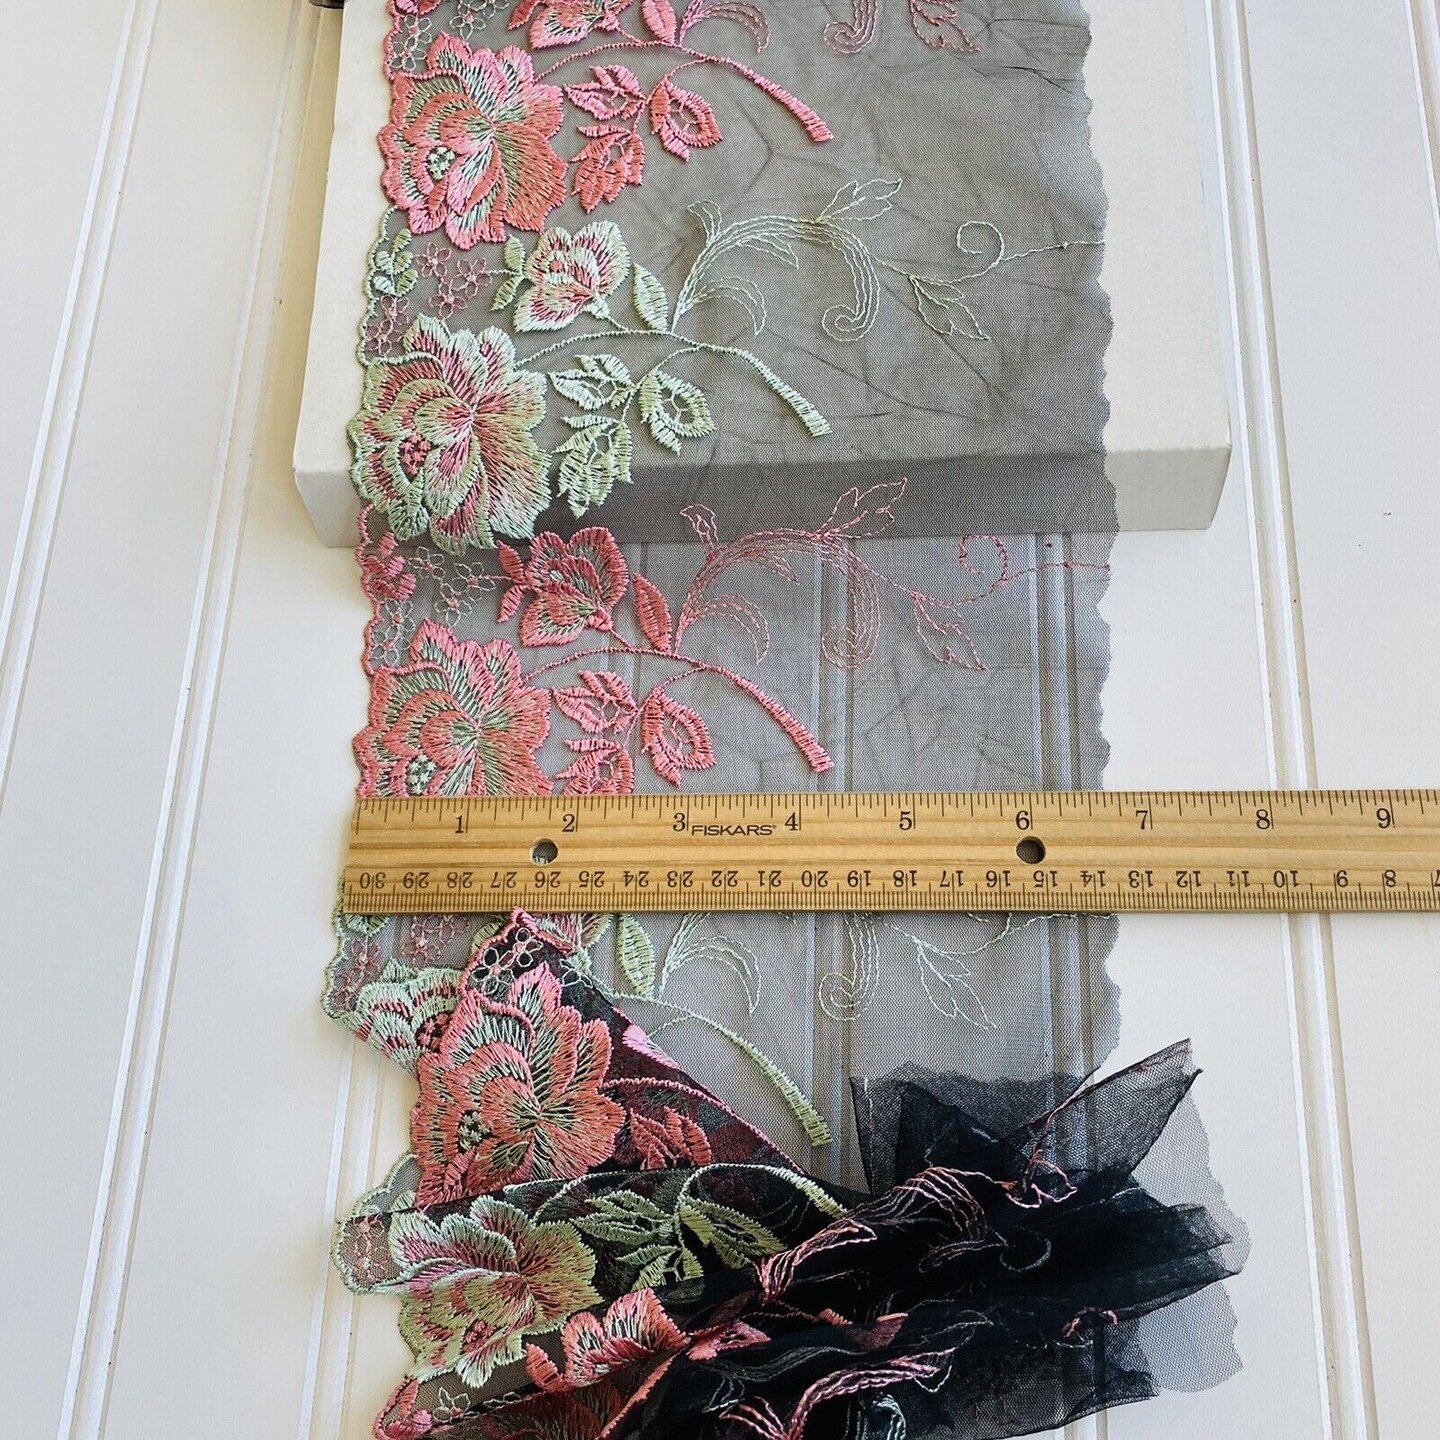 Kitcheniva Floral Embroidered Lace Trim Black Tulle Crafts